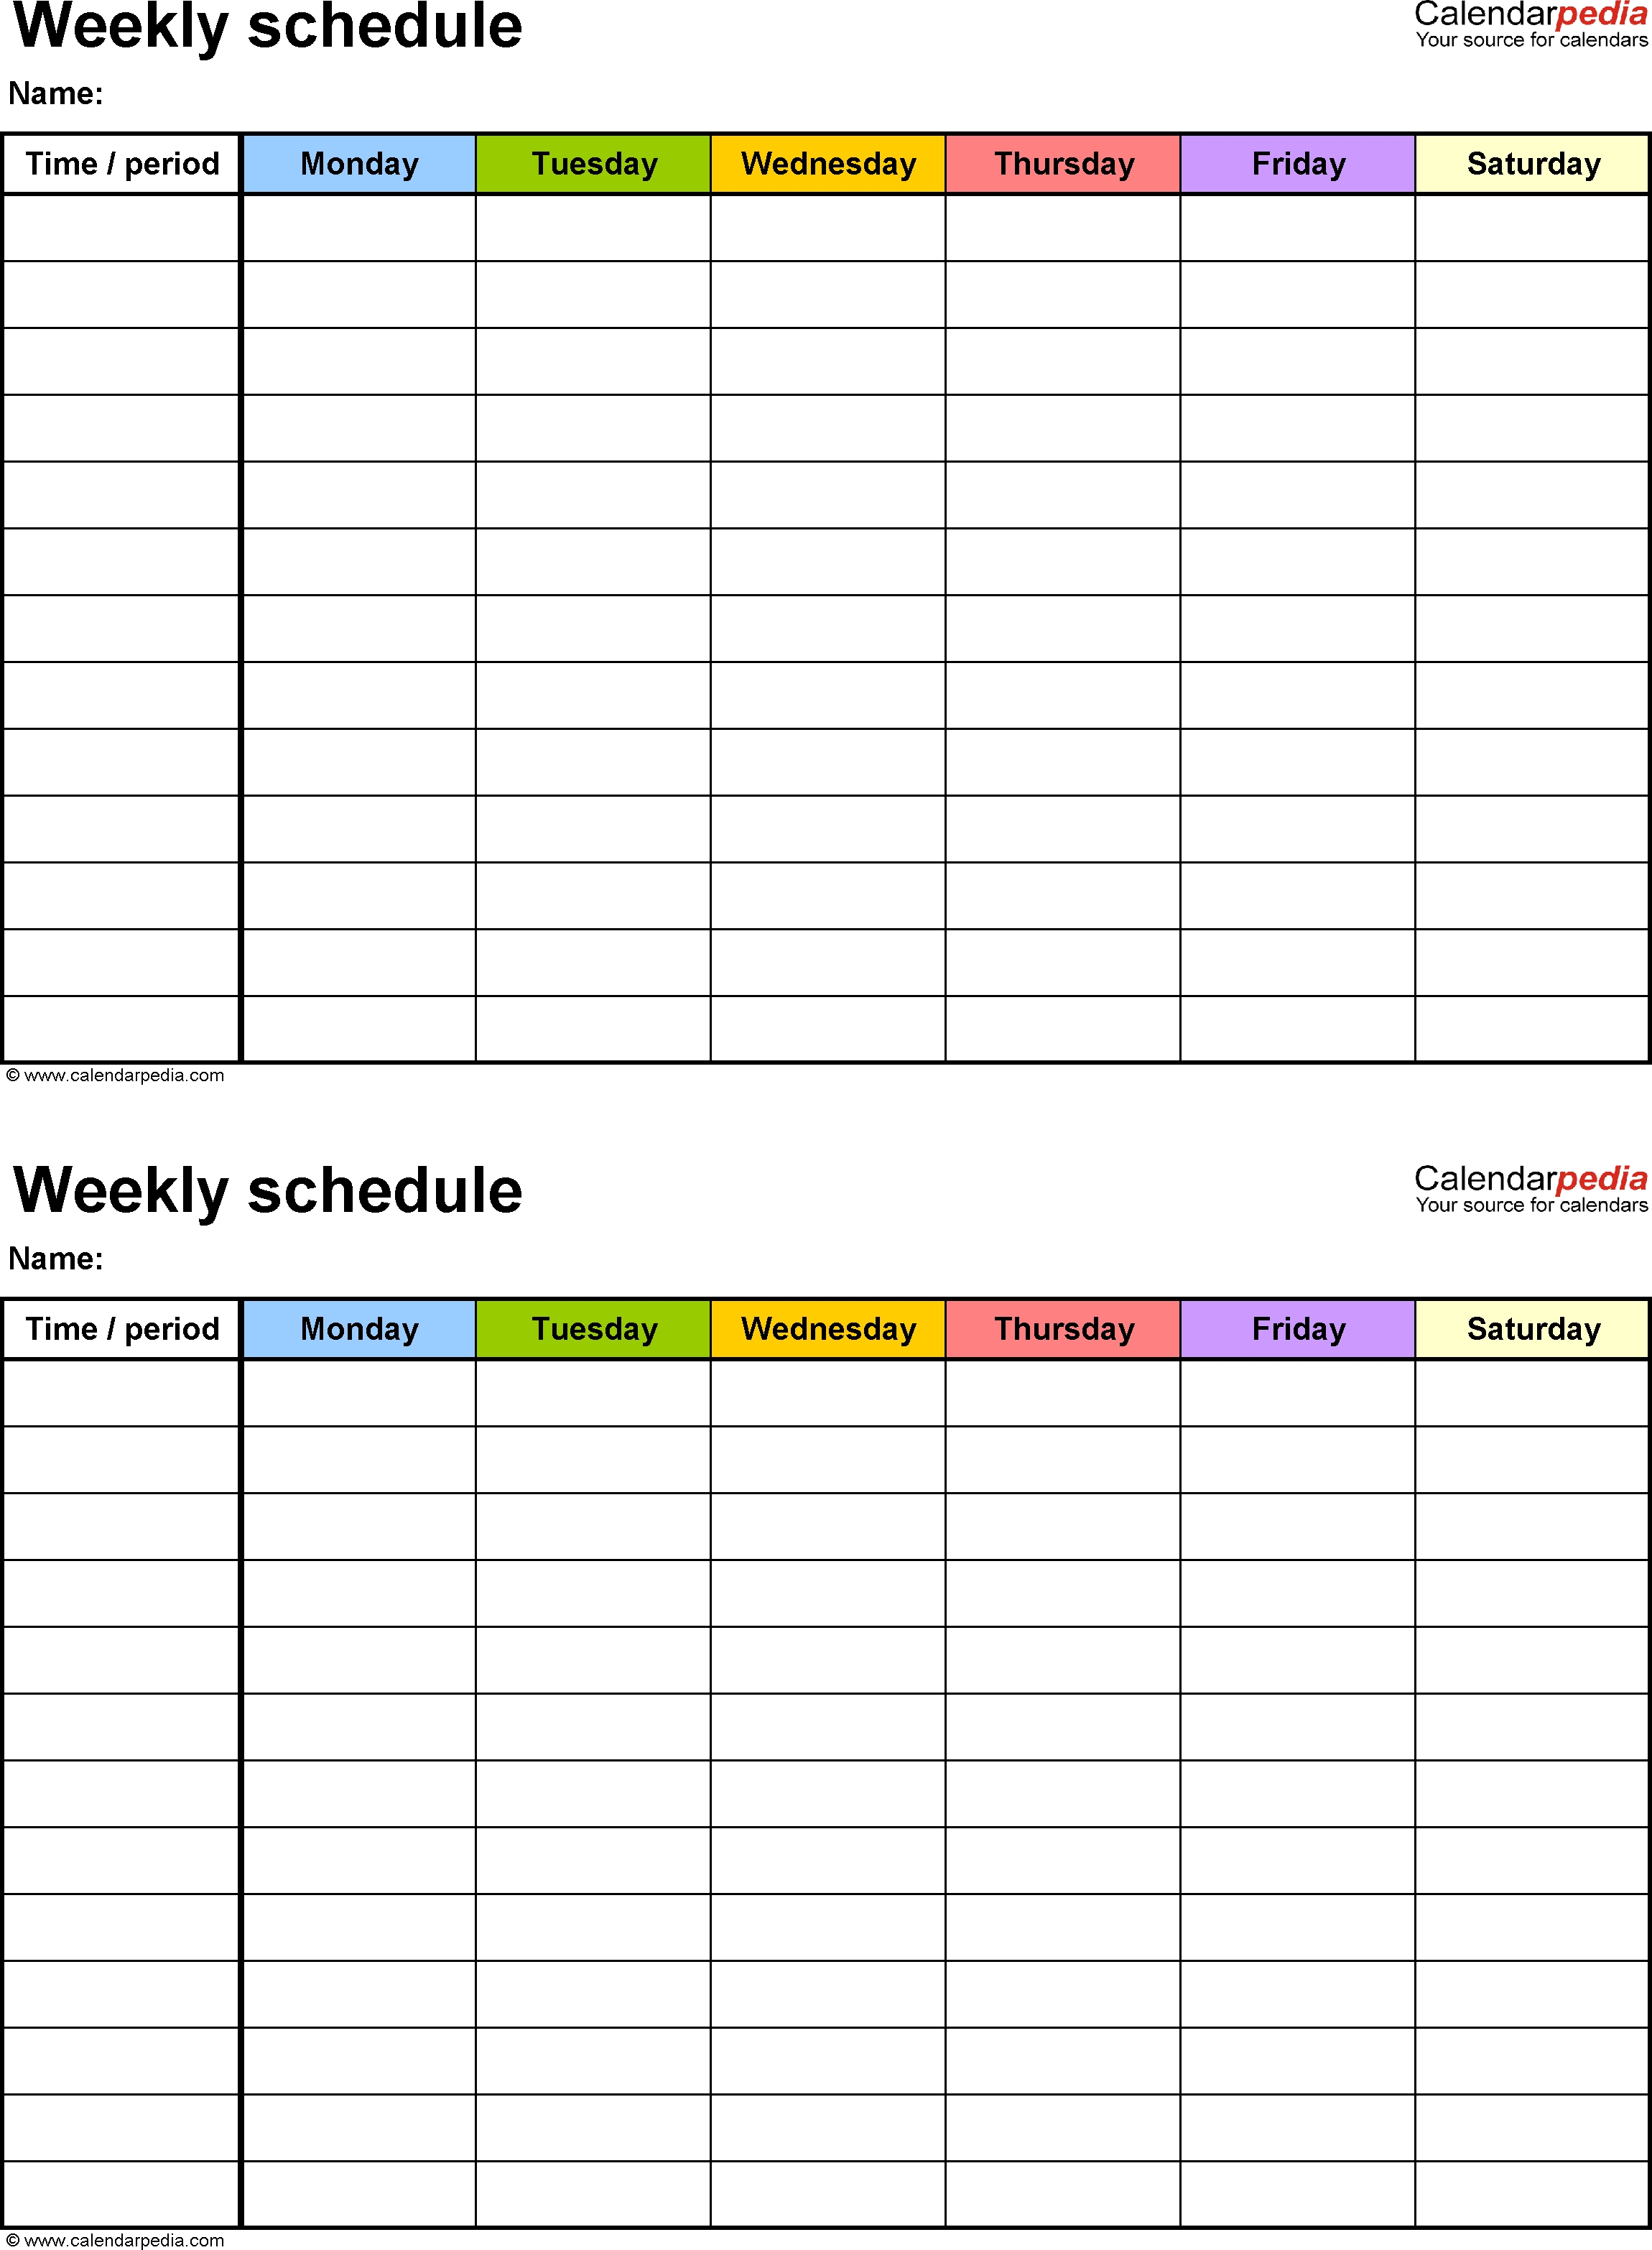 Free Weekly Schedule Templates For Word - 18 Templates regarding Monday Though Friday Timed Schedule